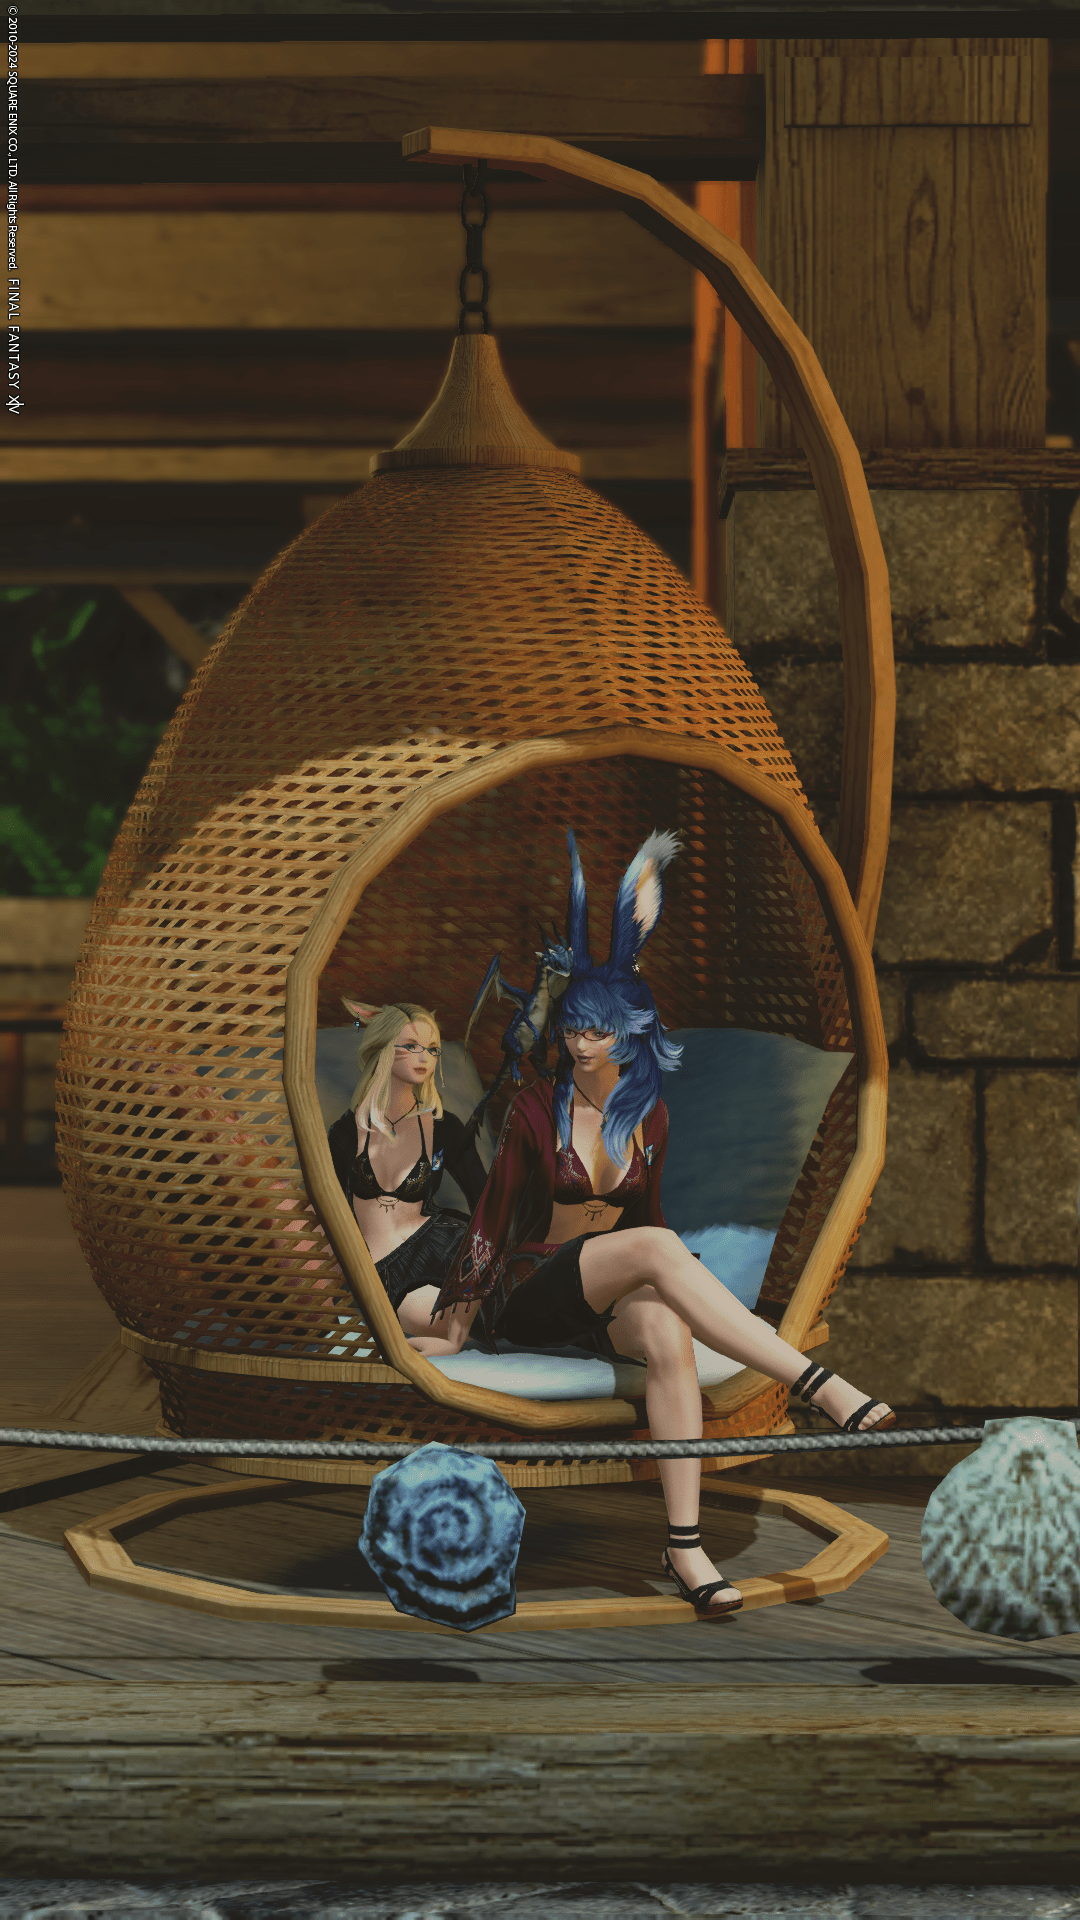 Aikirees and I sitting in a hanging basket chair within Island Sanctuary.